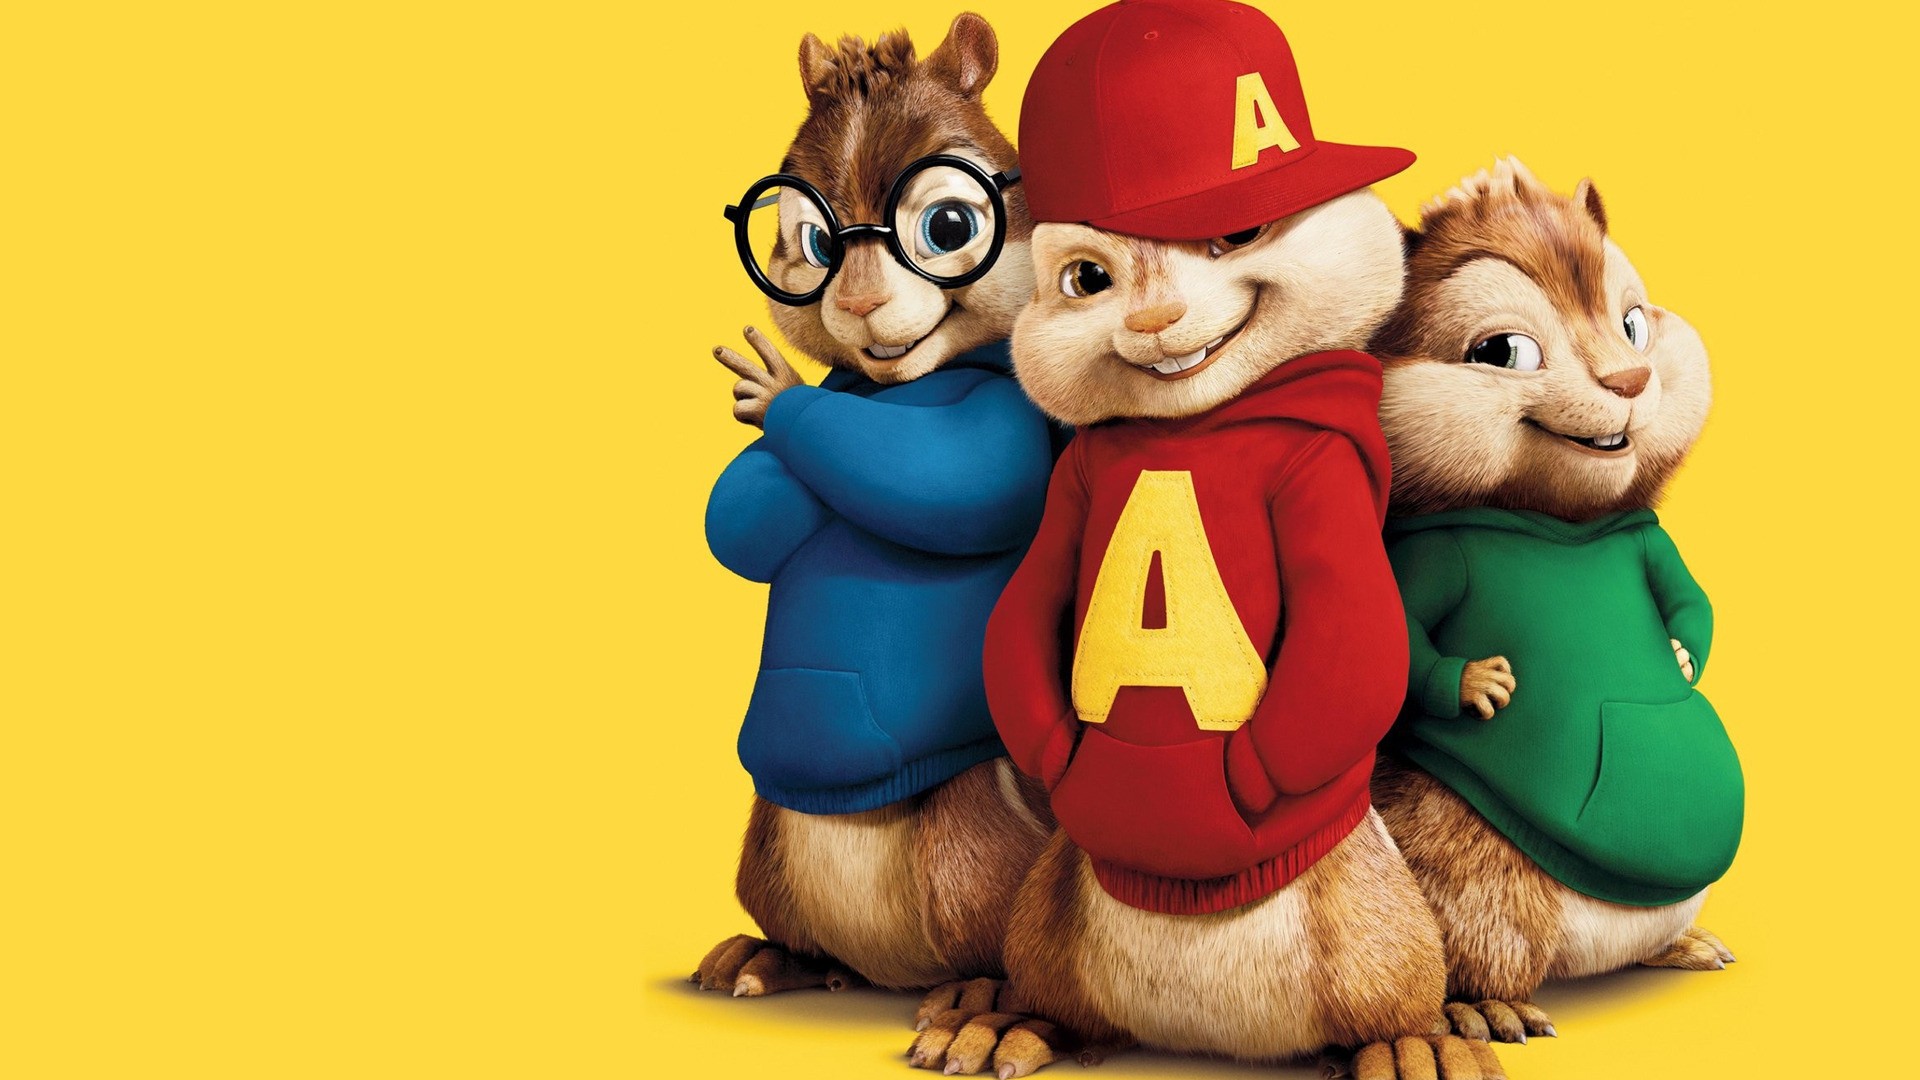 How to download alvin and the chipmunks cartoon